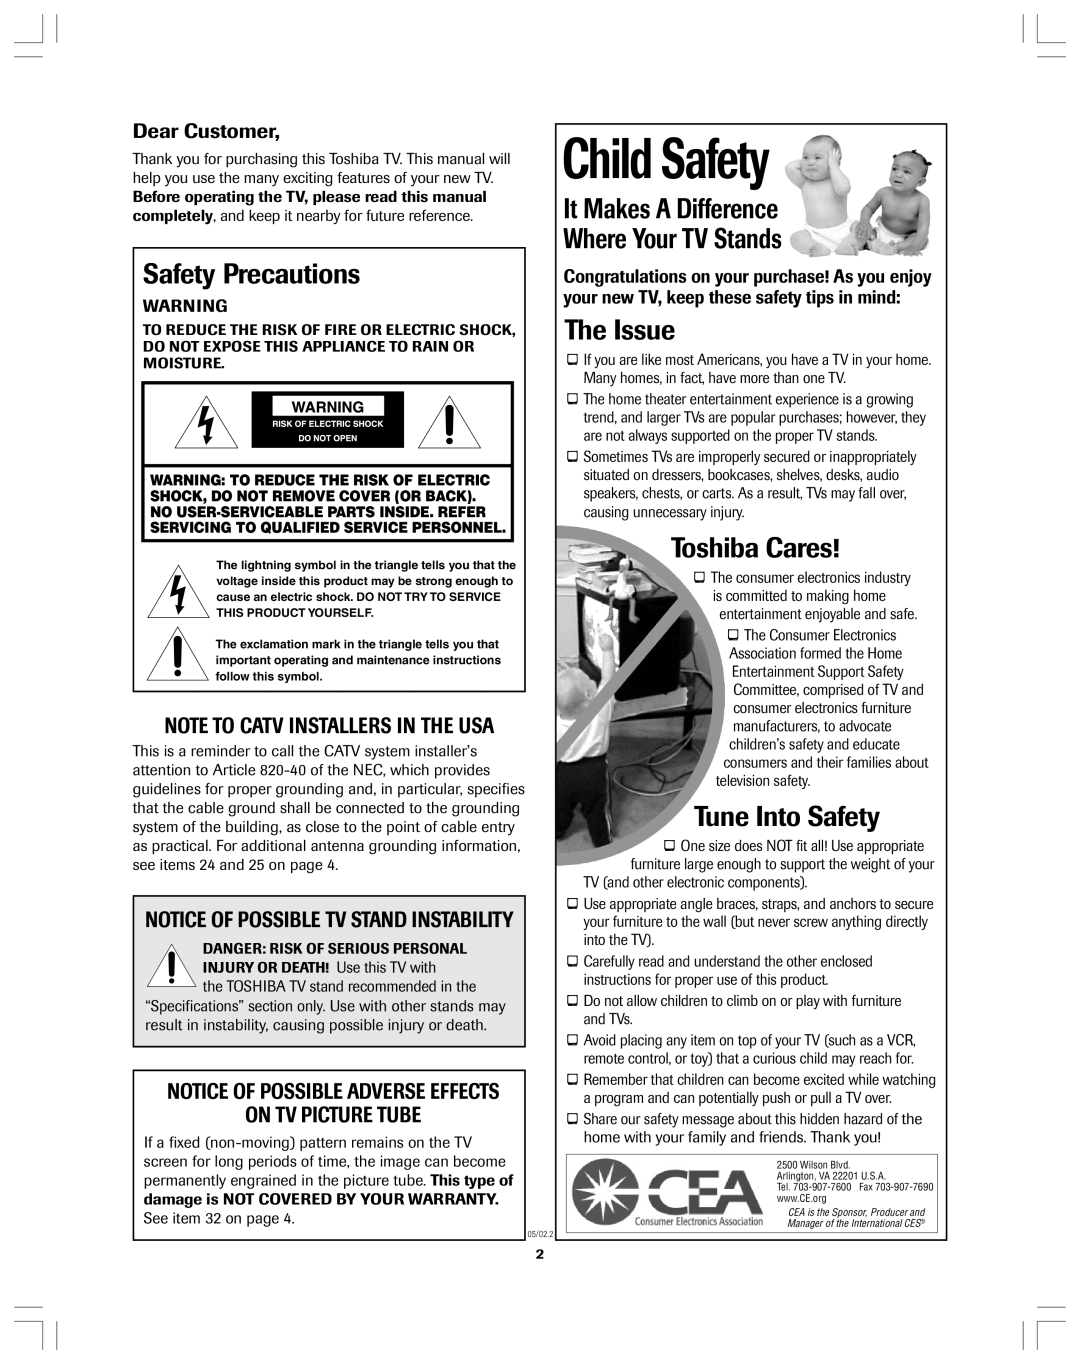 Toshiba 34AS42 Safety Precautions, It Makes A Difference Where Your TV Stands, The Issue, Toshiba Cares, Tune Into Safety 